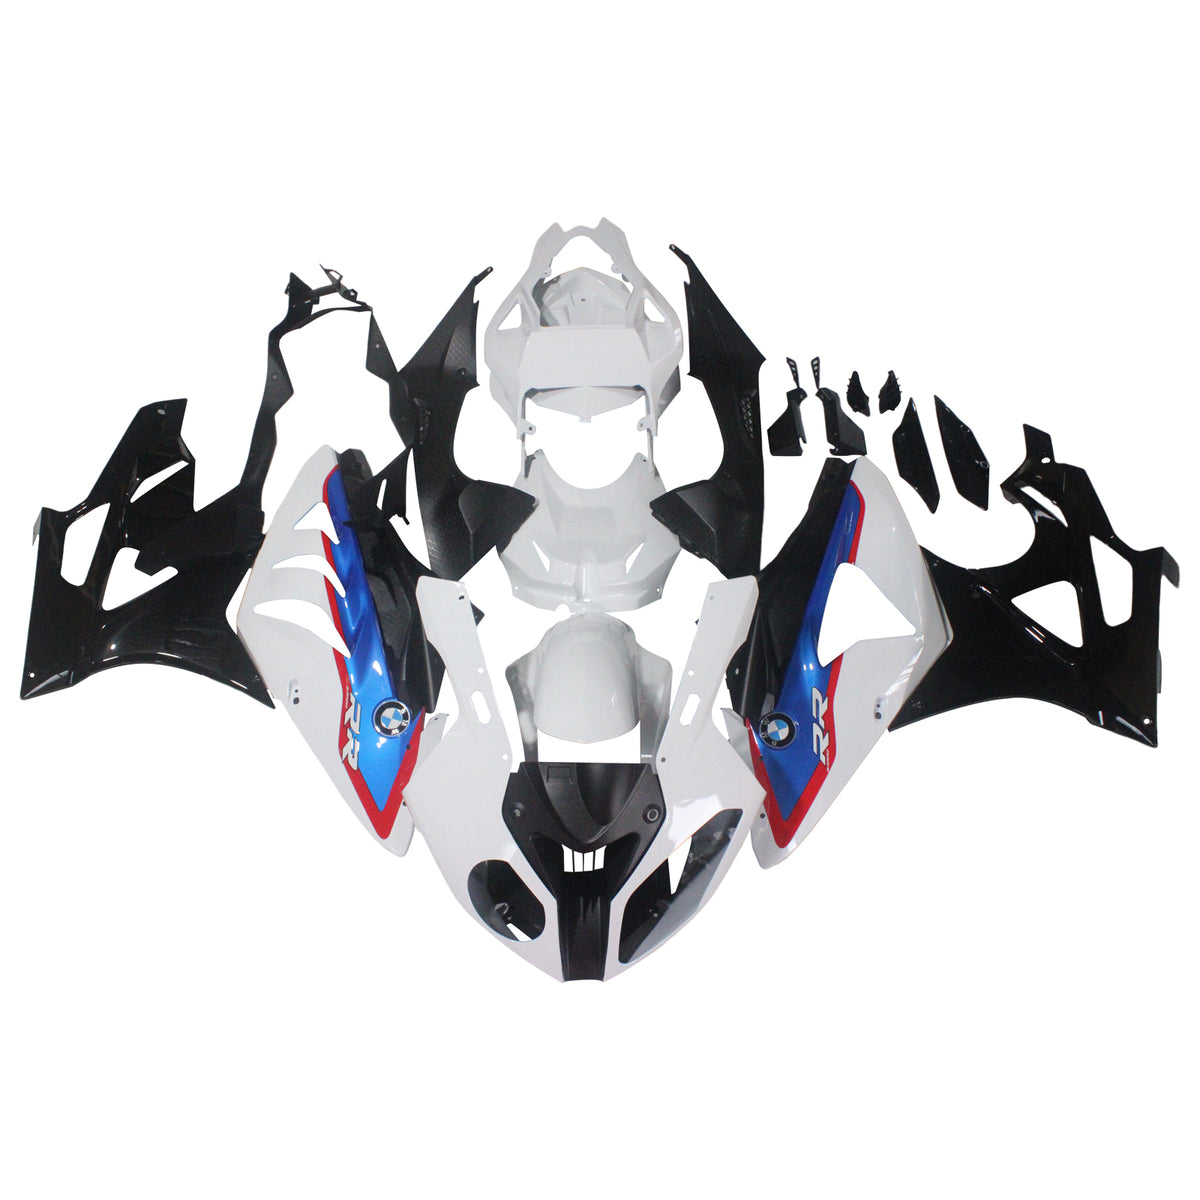 Amotopart BMW S1000RR 2009-2014 Blue&Red Style4 Fairing Kit